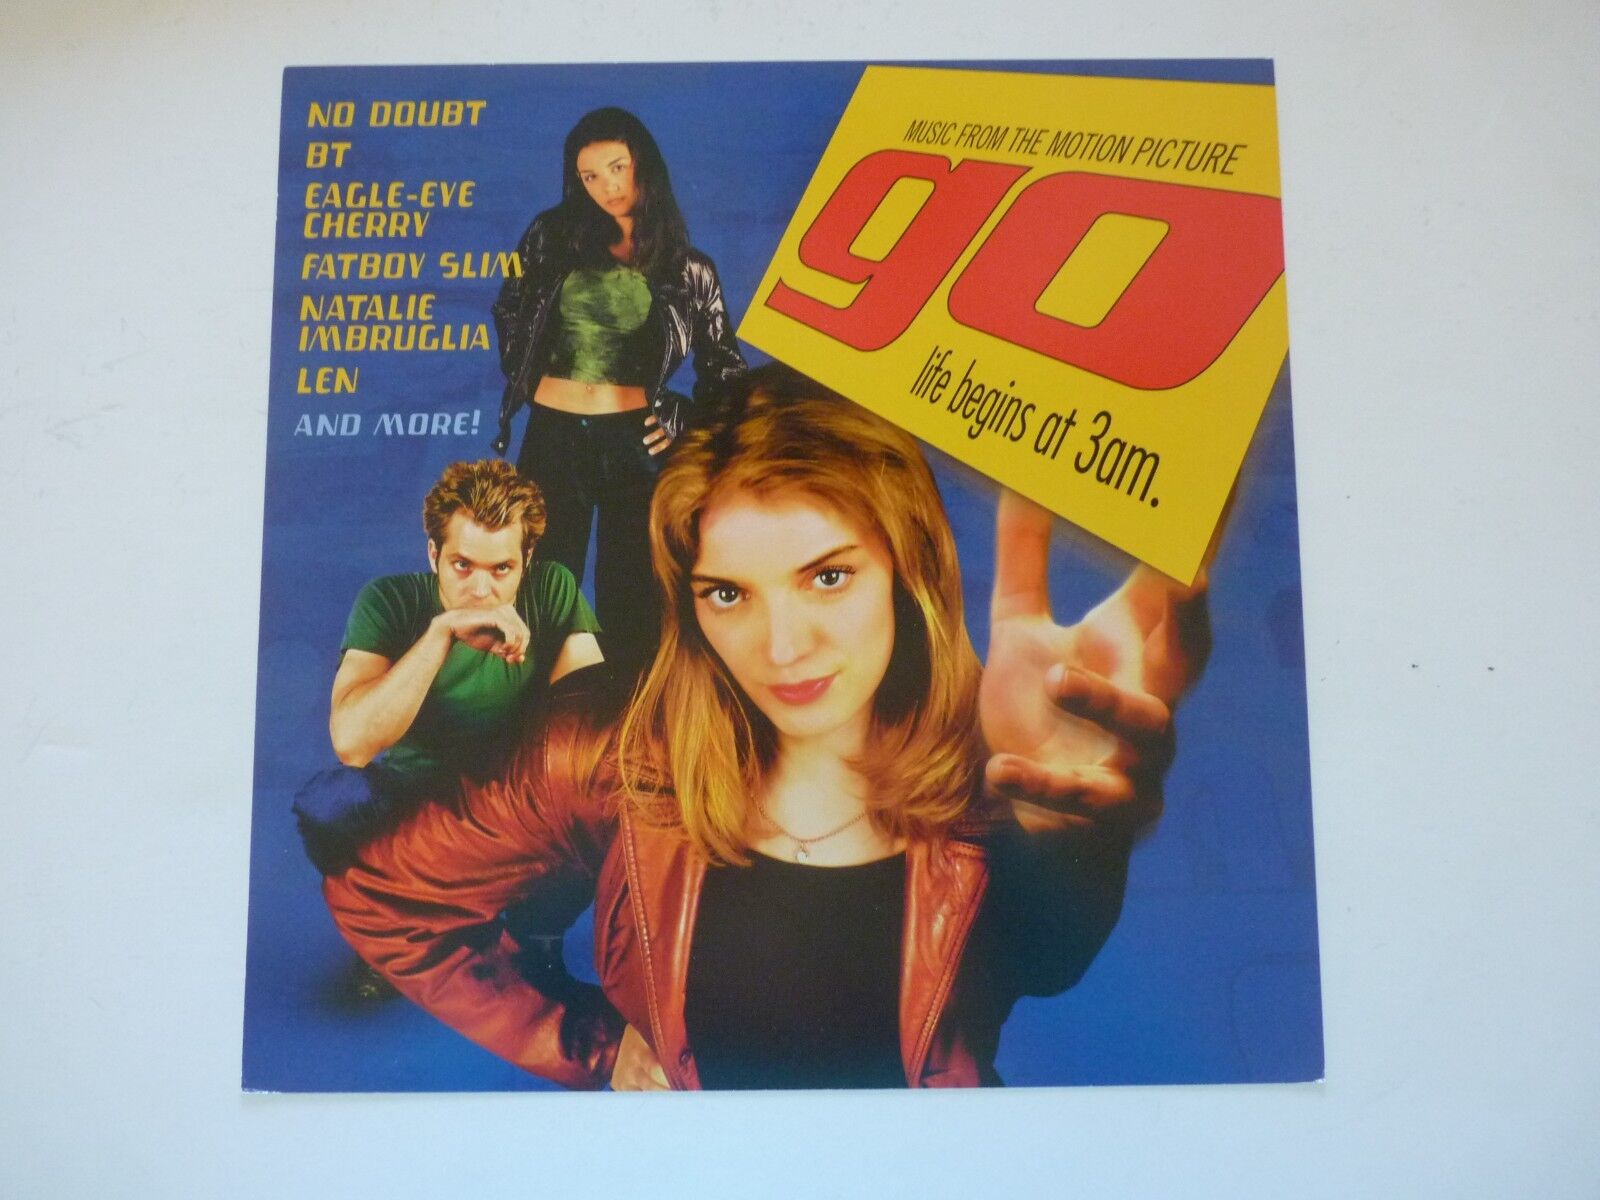 No Doubt Go Movie Imbruglia Len Eagle Eye LP Record Photo Poster painting Flat 12x12 Poster